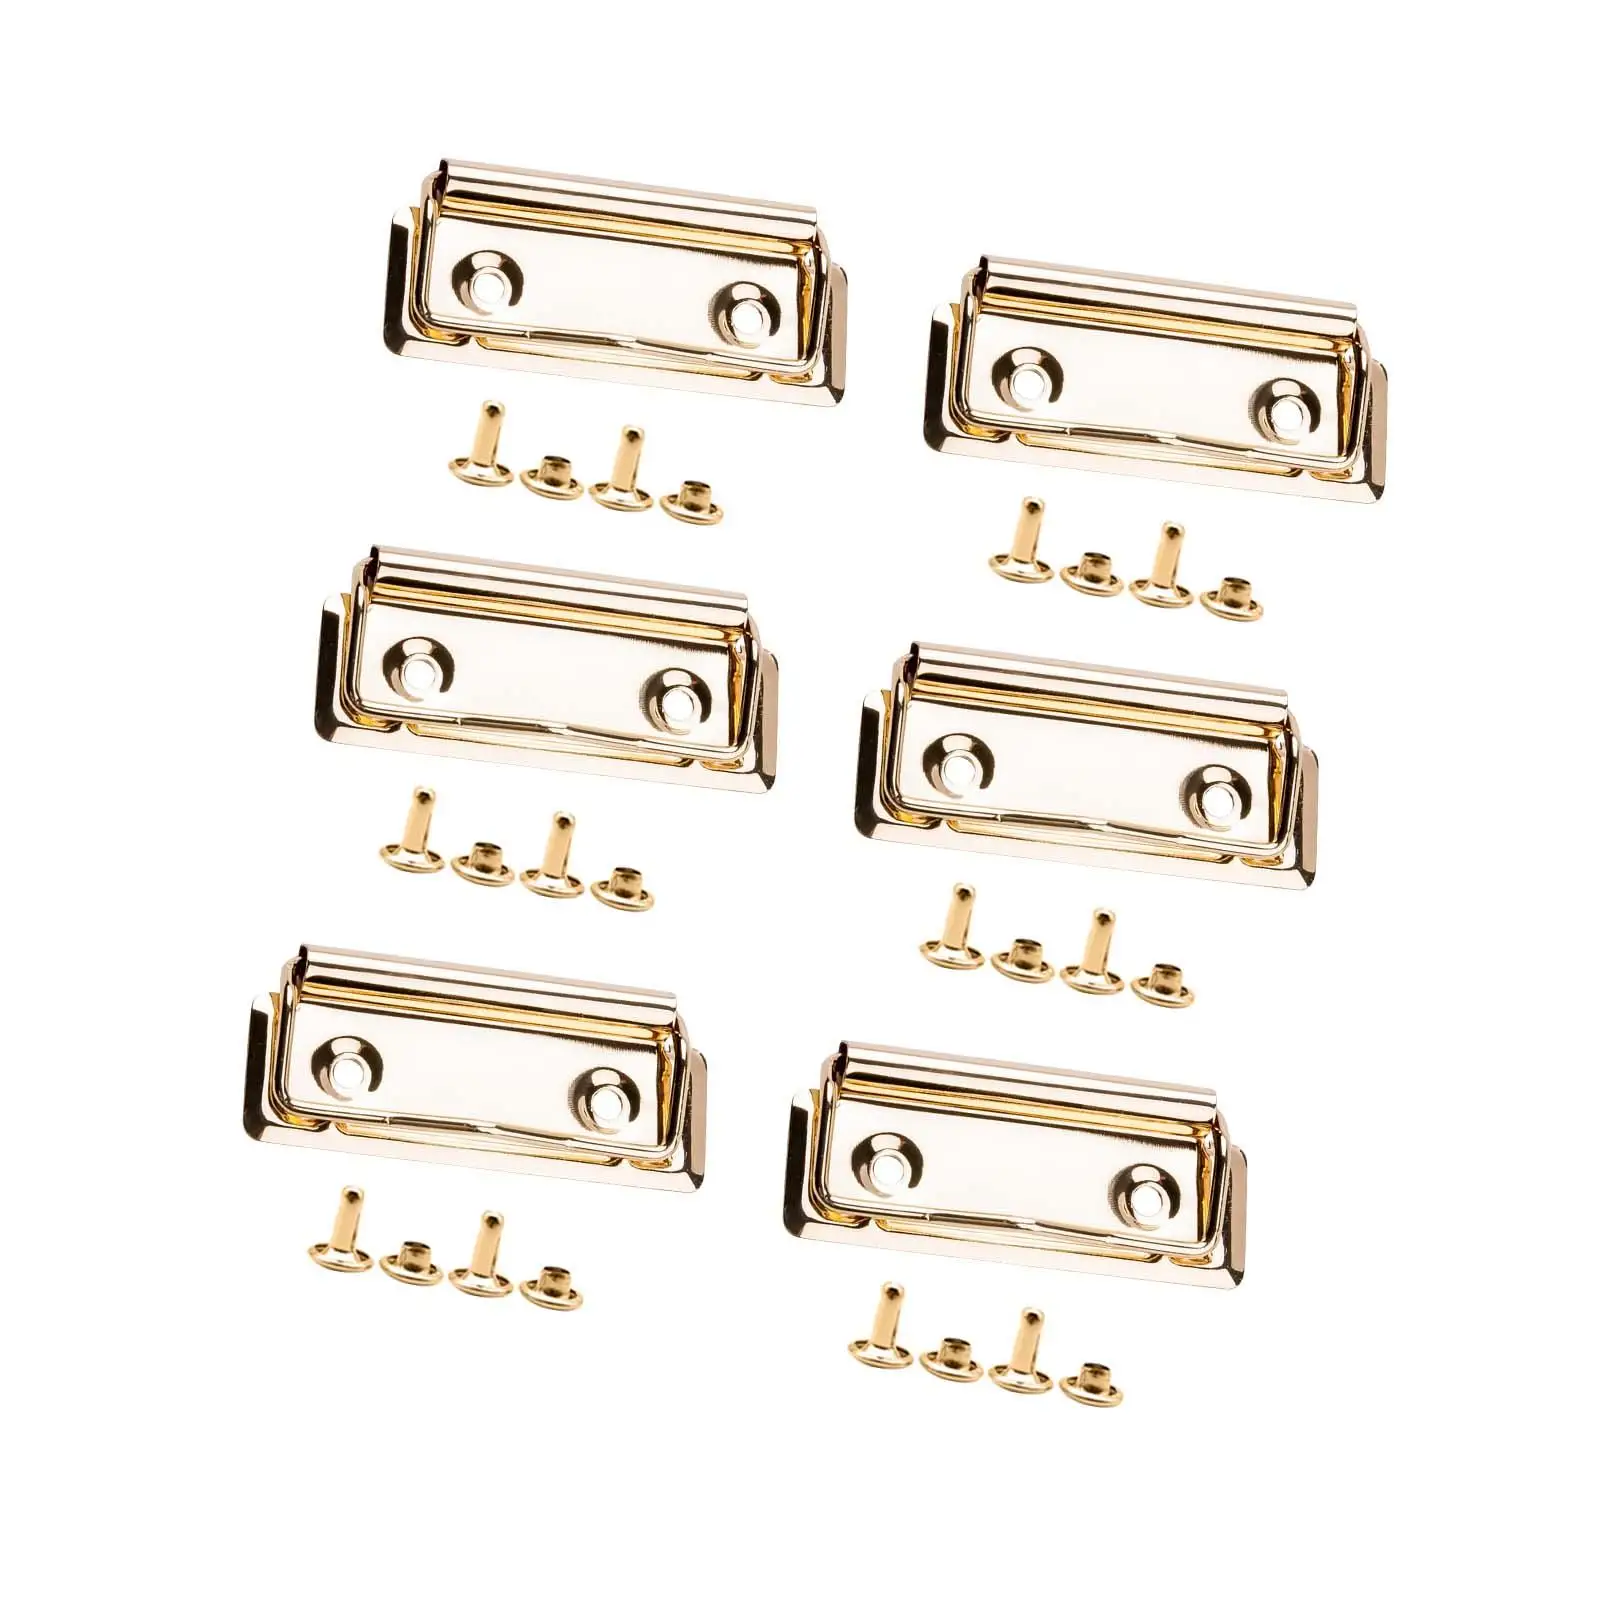 6Pcs Mountable Clipboard Clips Heavy Duty Metal Stationery Plate Holder Document File Board Clips for Stationery Supplies School